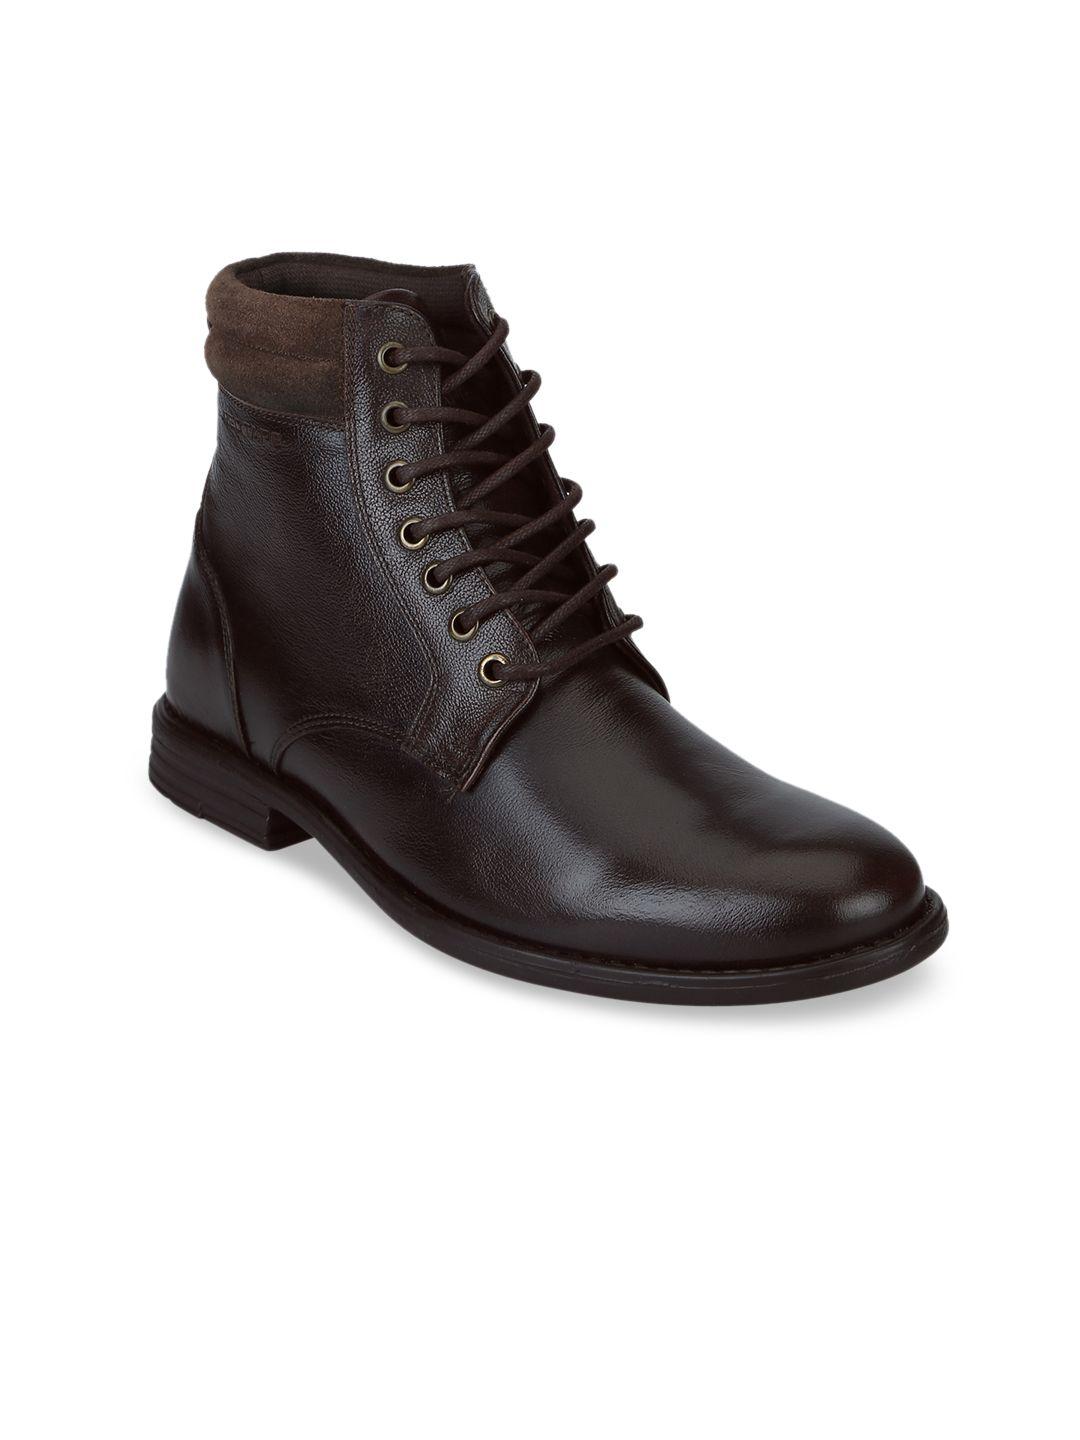 red tape men coffee brown solid leather mid-top flat boots